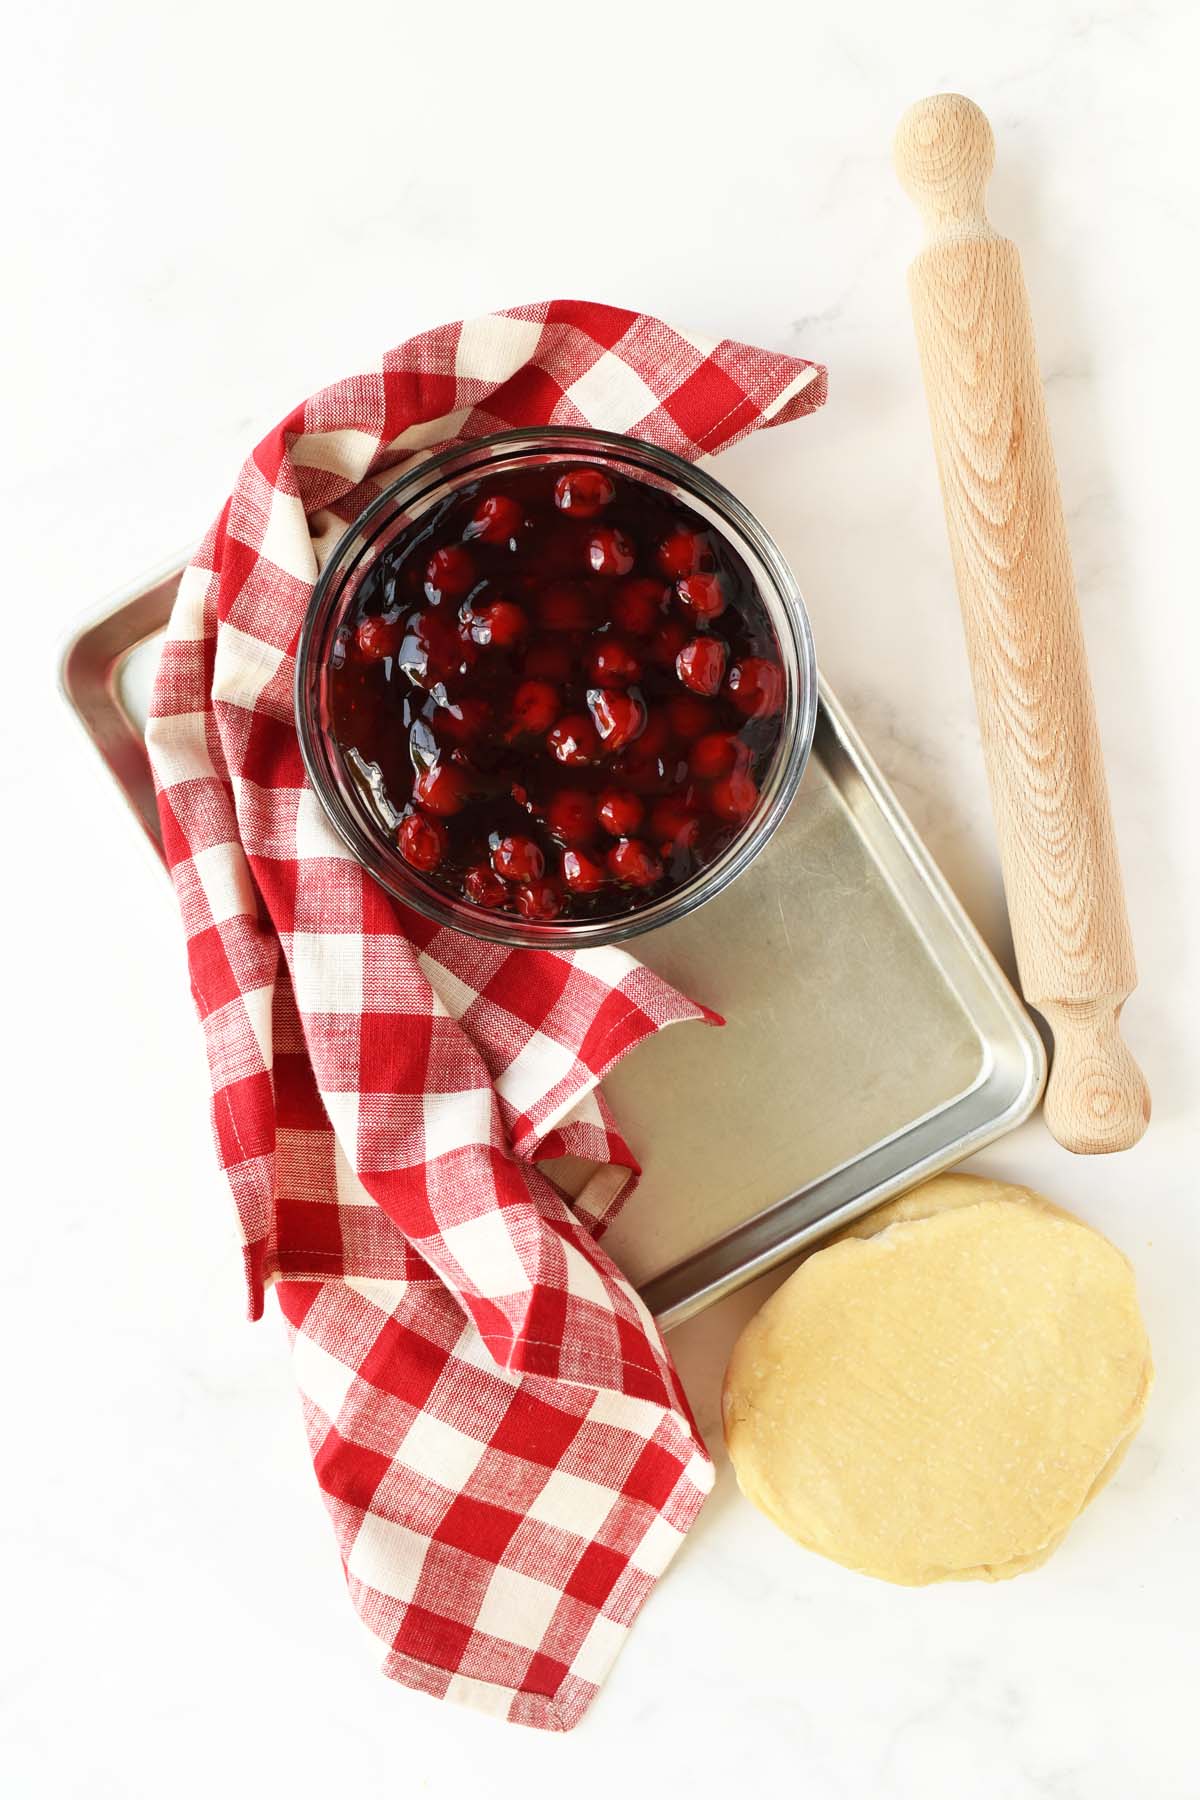 Cherry pie filling, rolling pin, dough, and checkered red napkin on a white table.